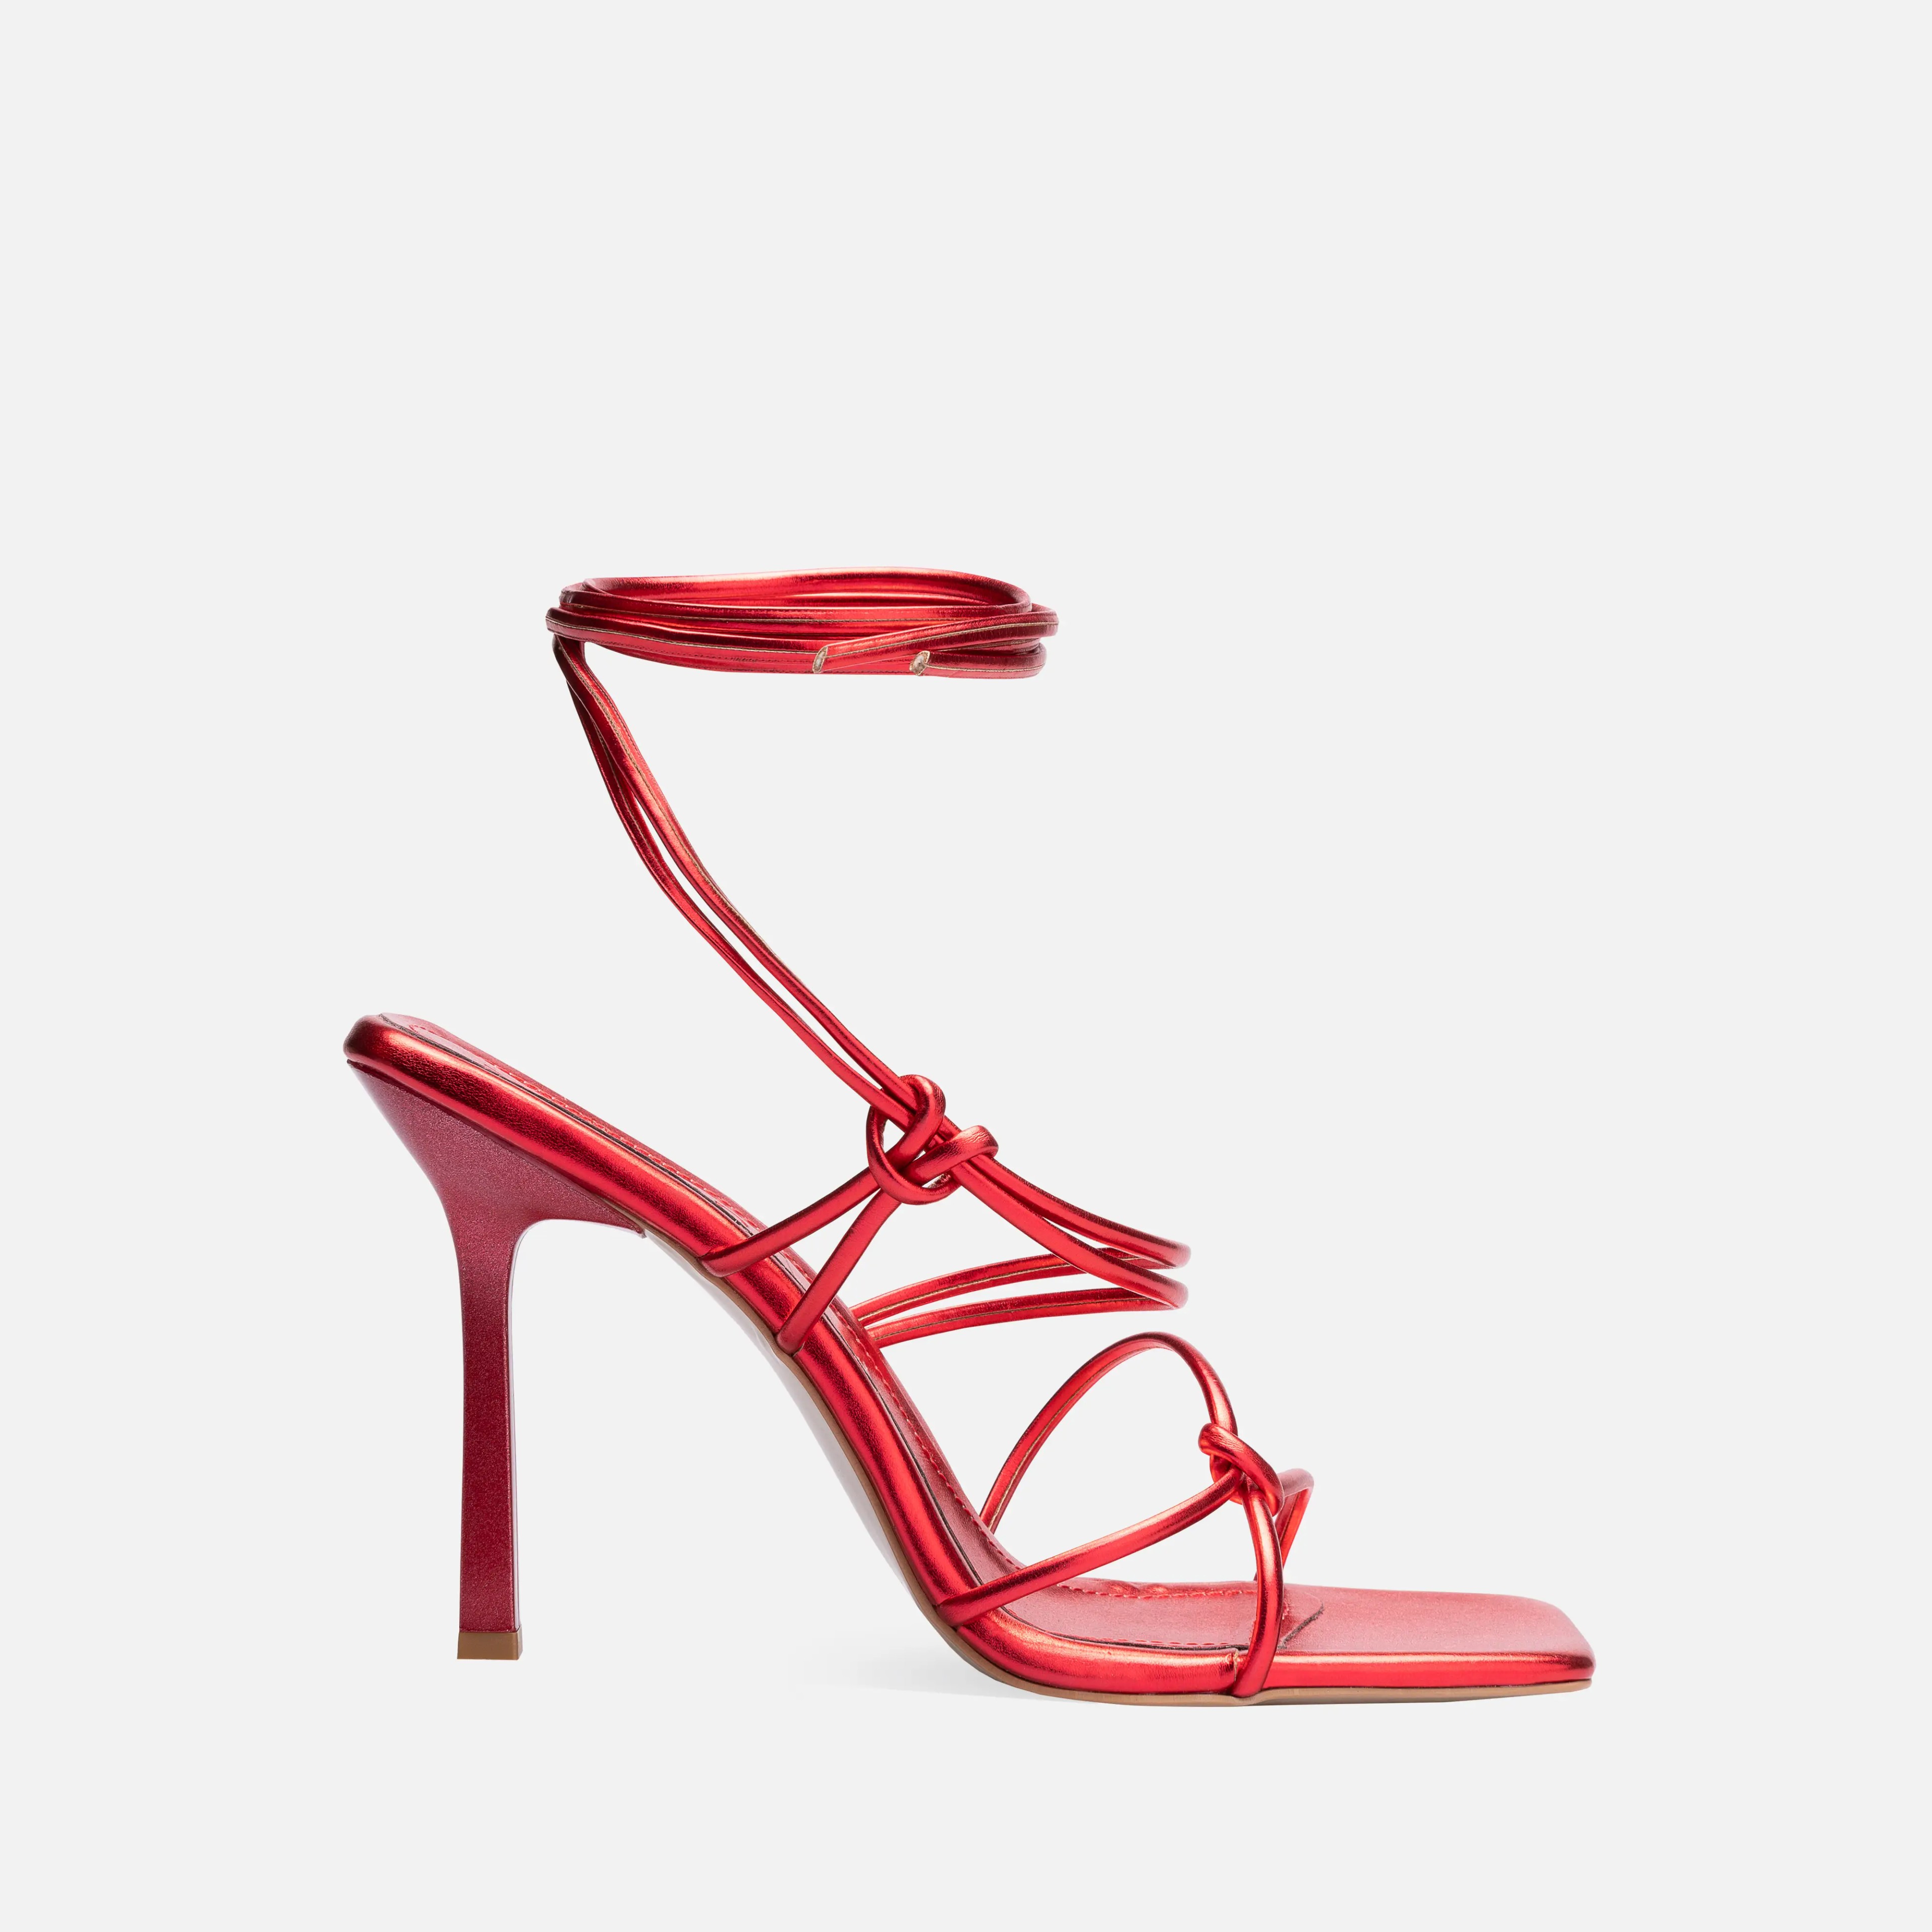 Metallic Lace-Up Thin High-Heeled Shoes - Red